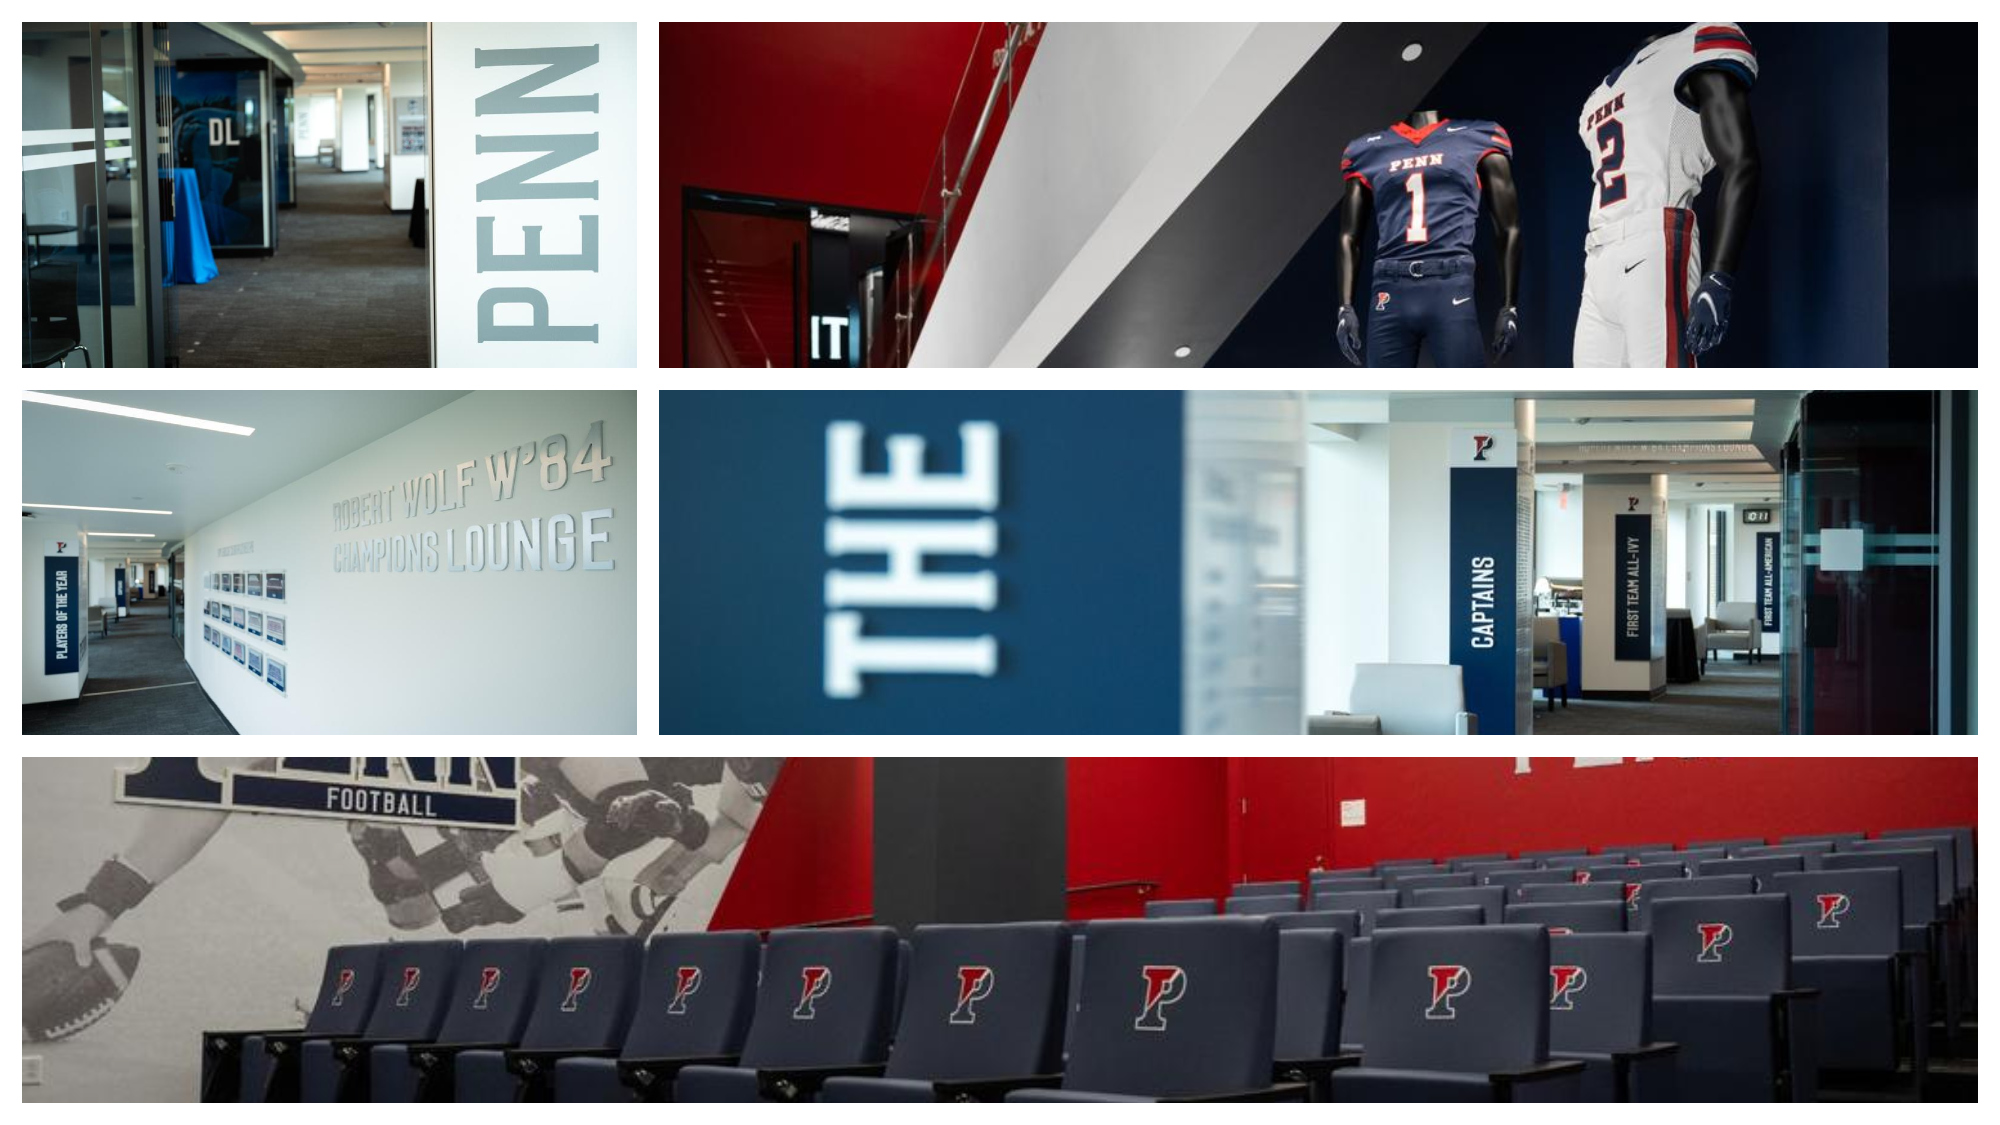 The new meeting rooms, team rooms, and spaces at Franklin Field.